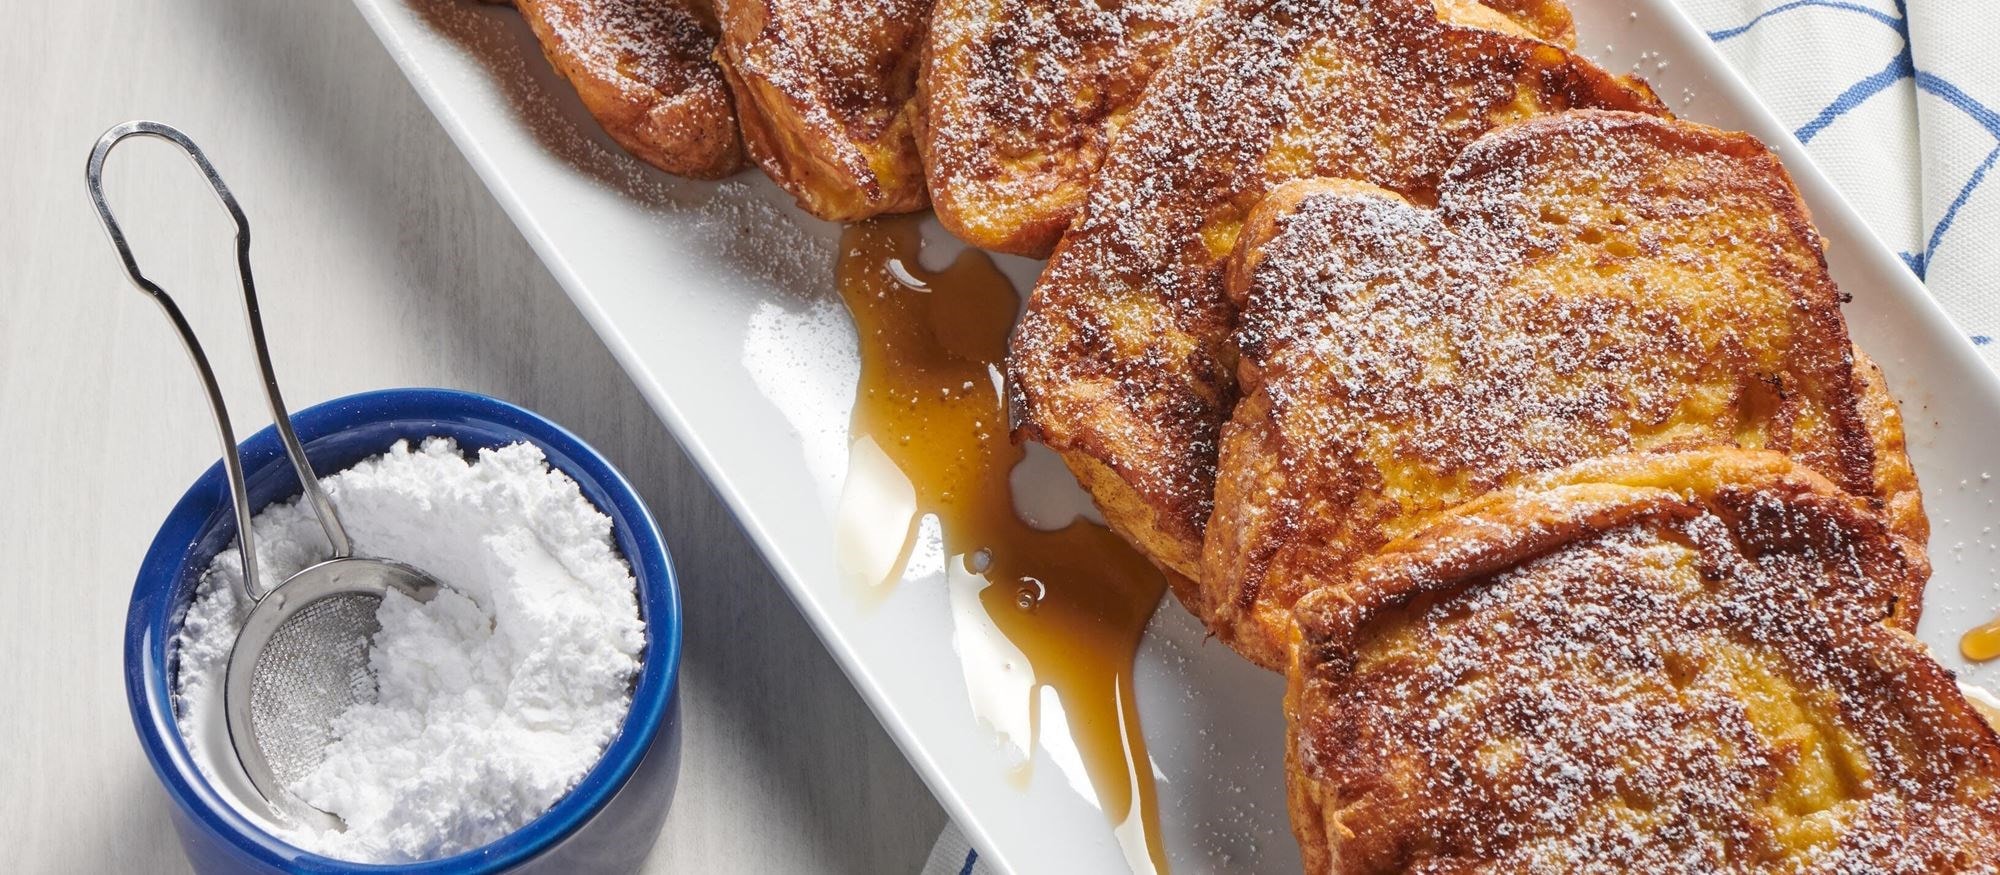 Easy and delicious French Toast with Browned Butter recipe using the Griddle Mode setting of your Wolf Dual Fuel Range